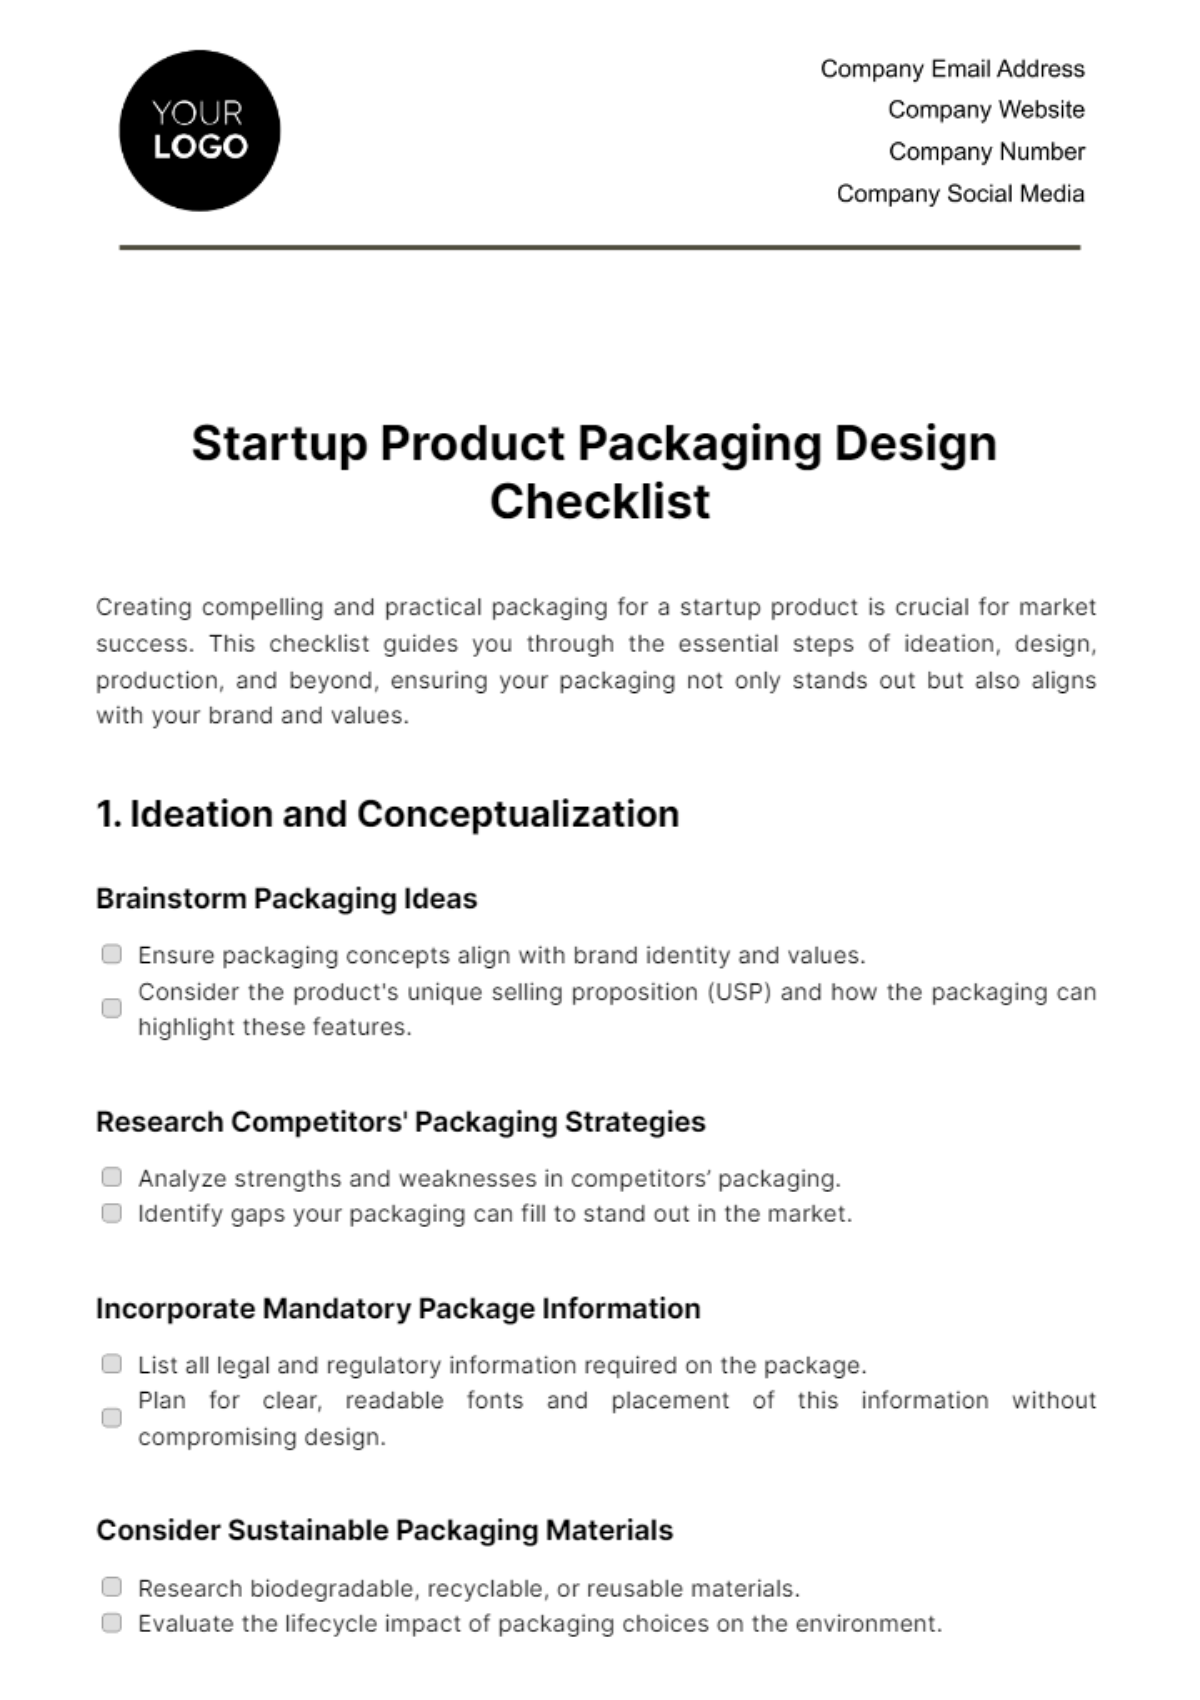 Startup Product Packaging Design Checklist Template